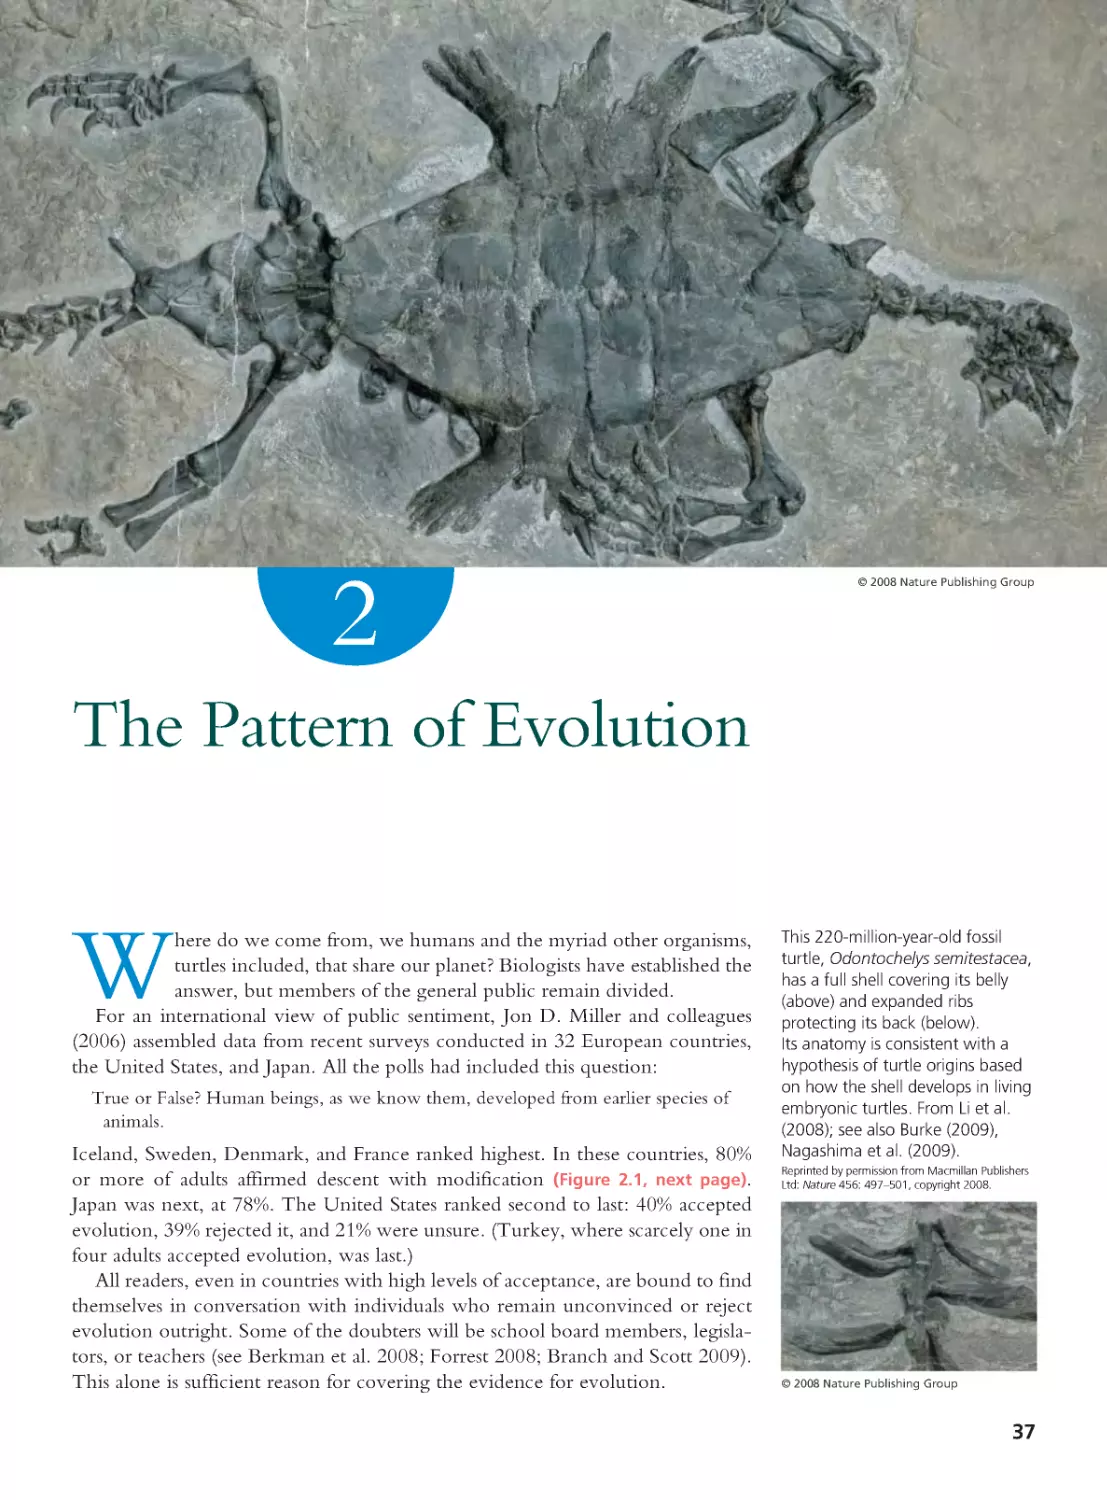 CHAPTER 2 The Pattern of Evolution